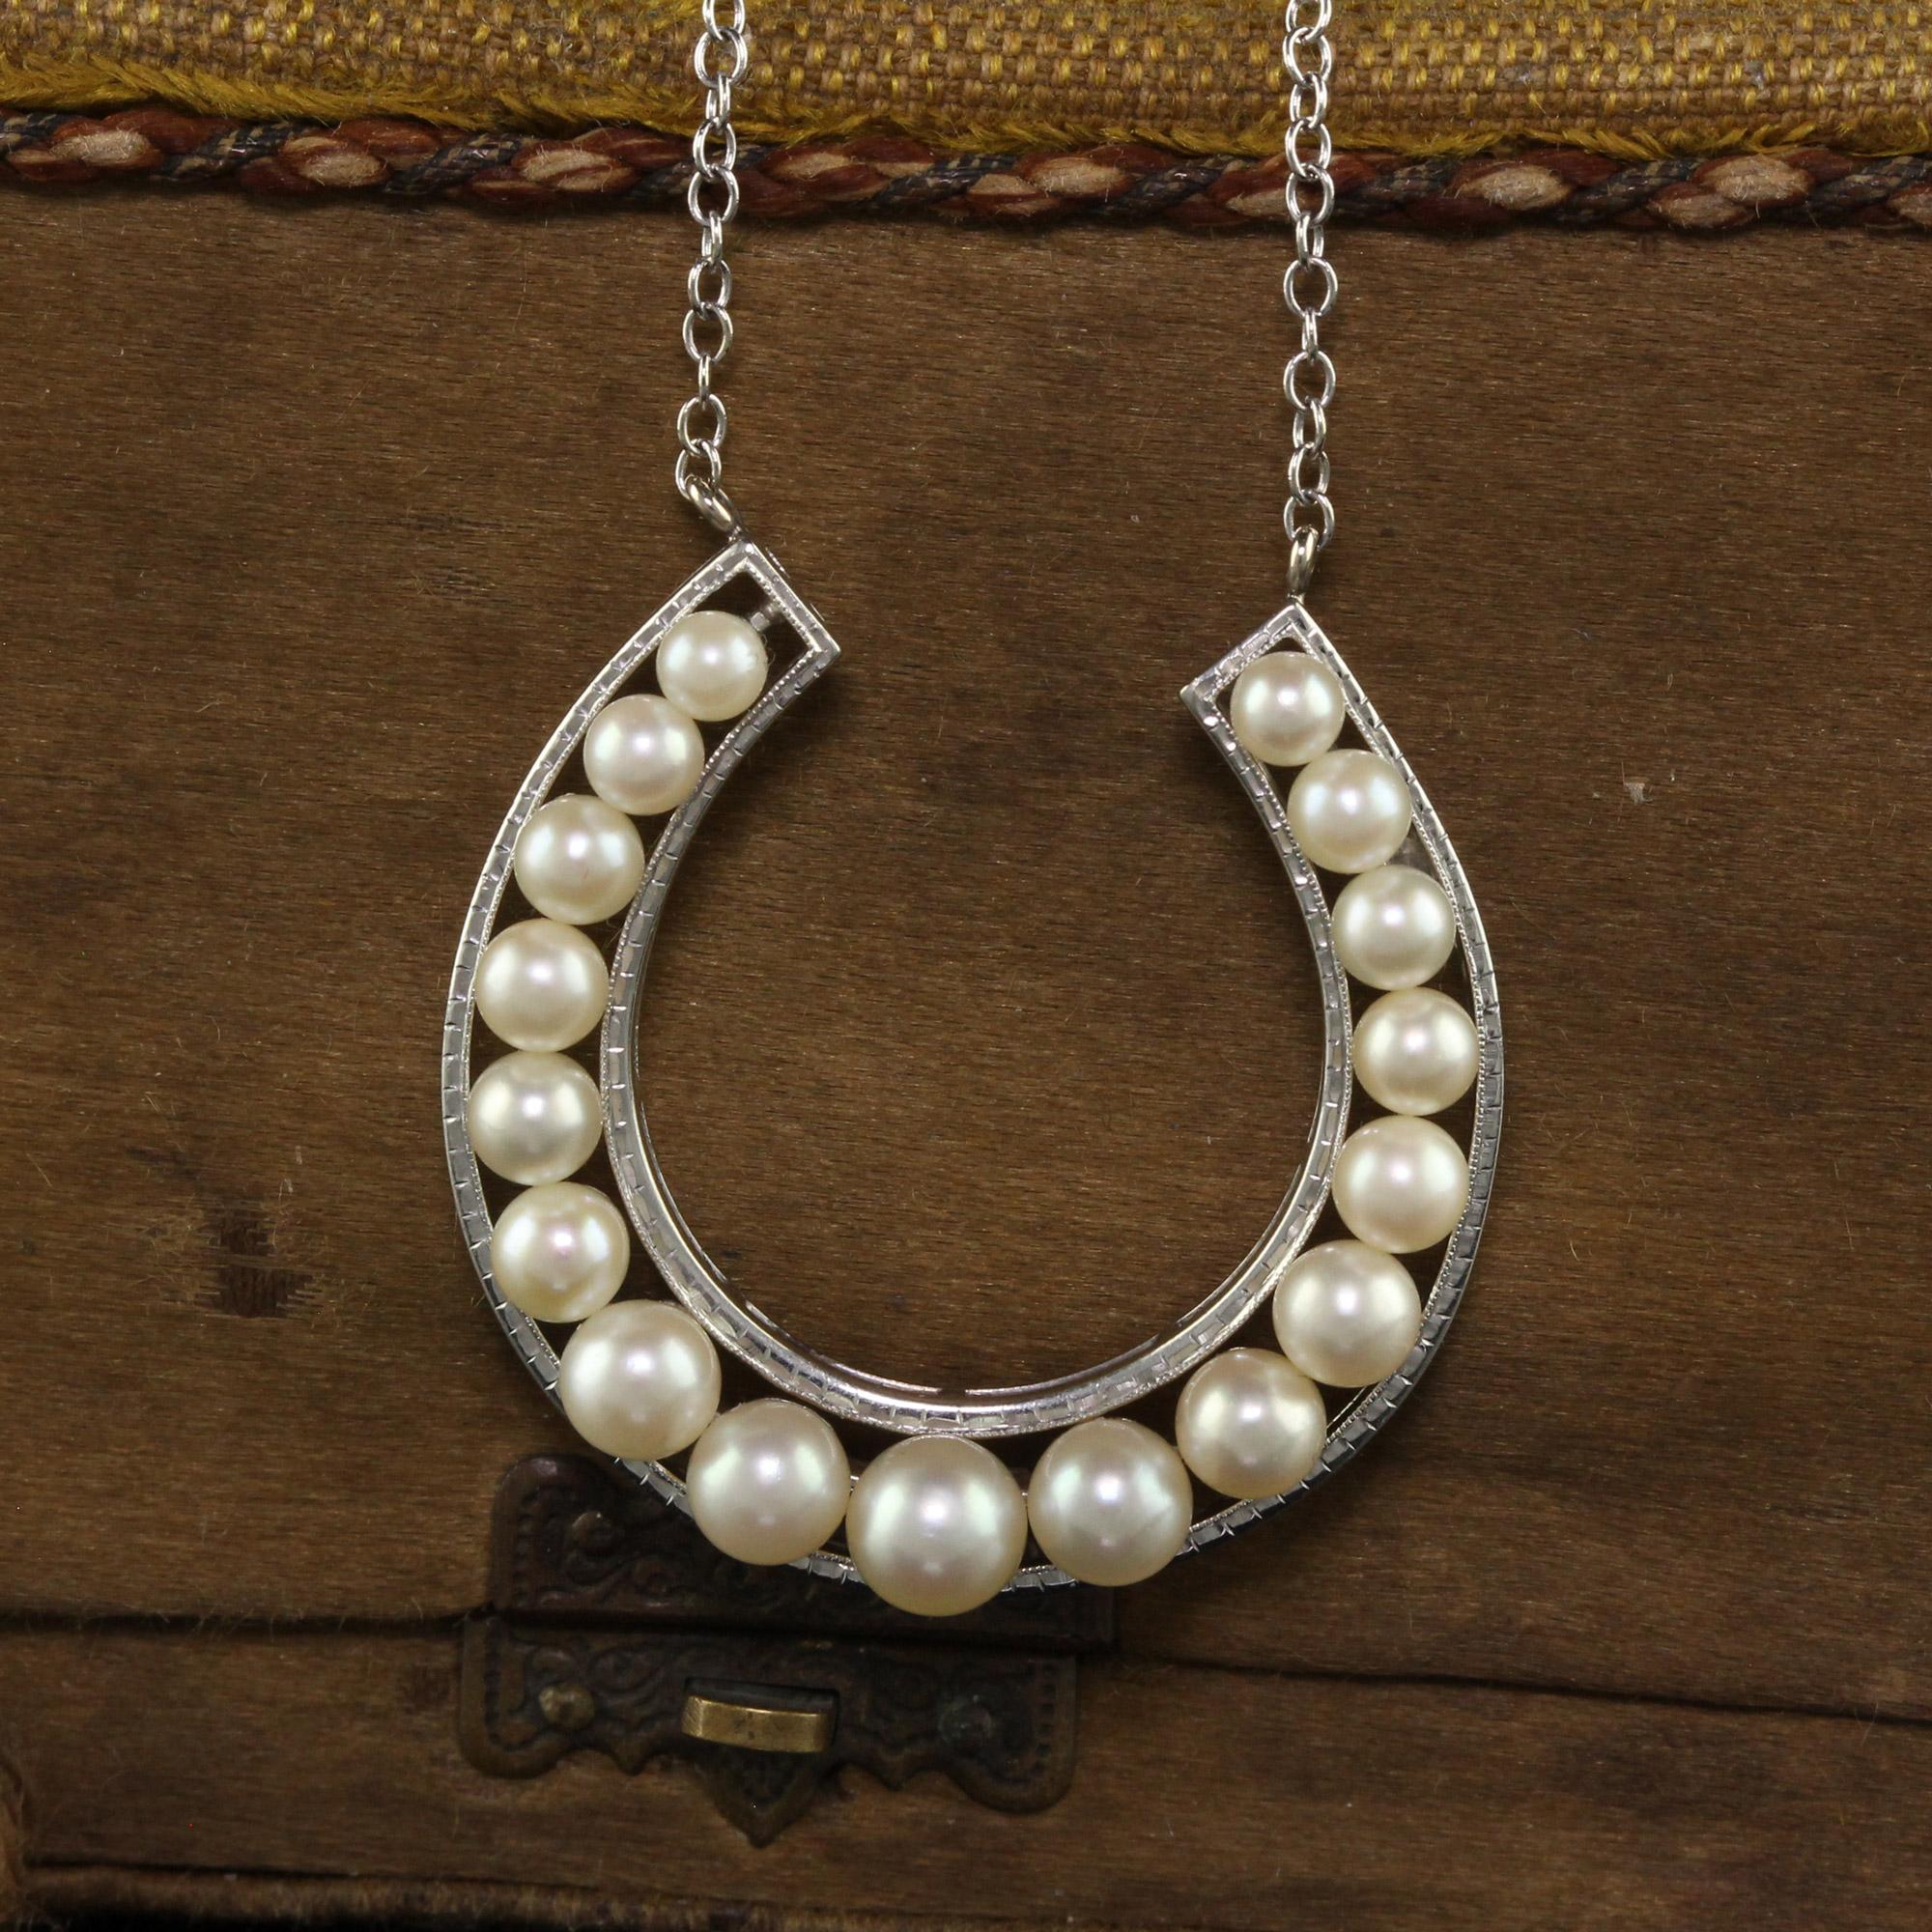 Beautiful Vintage 18K White Gold Mikimoto Akoya Pearl Horseshoe Pendant Necklace. This beautiful Mikimoto pearl pendant is crafted with 18k white gold. The top of the horseshoe has a row of beautiful graduated pearls that have gorgeous luster. The